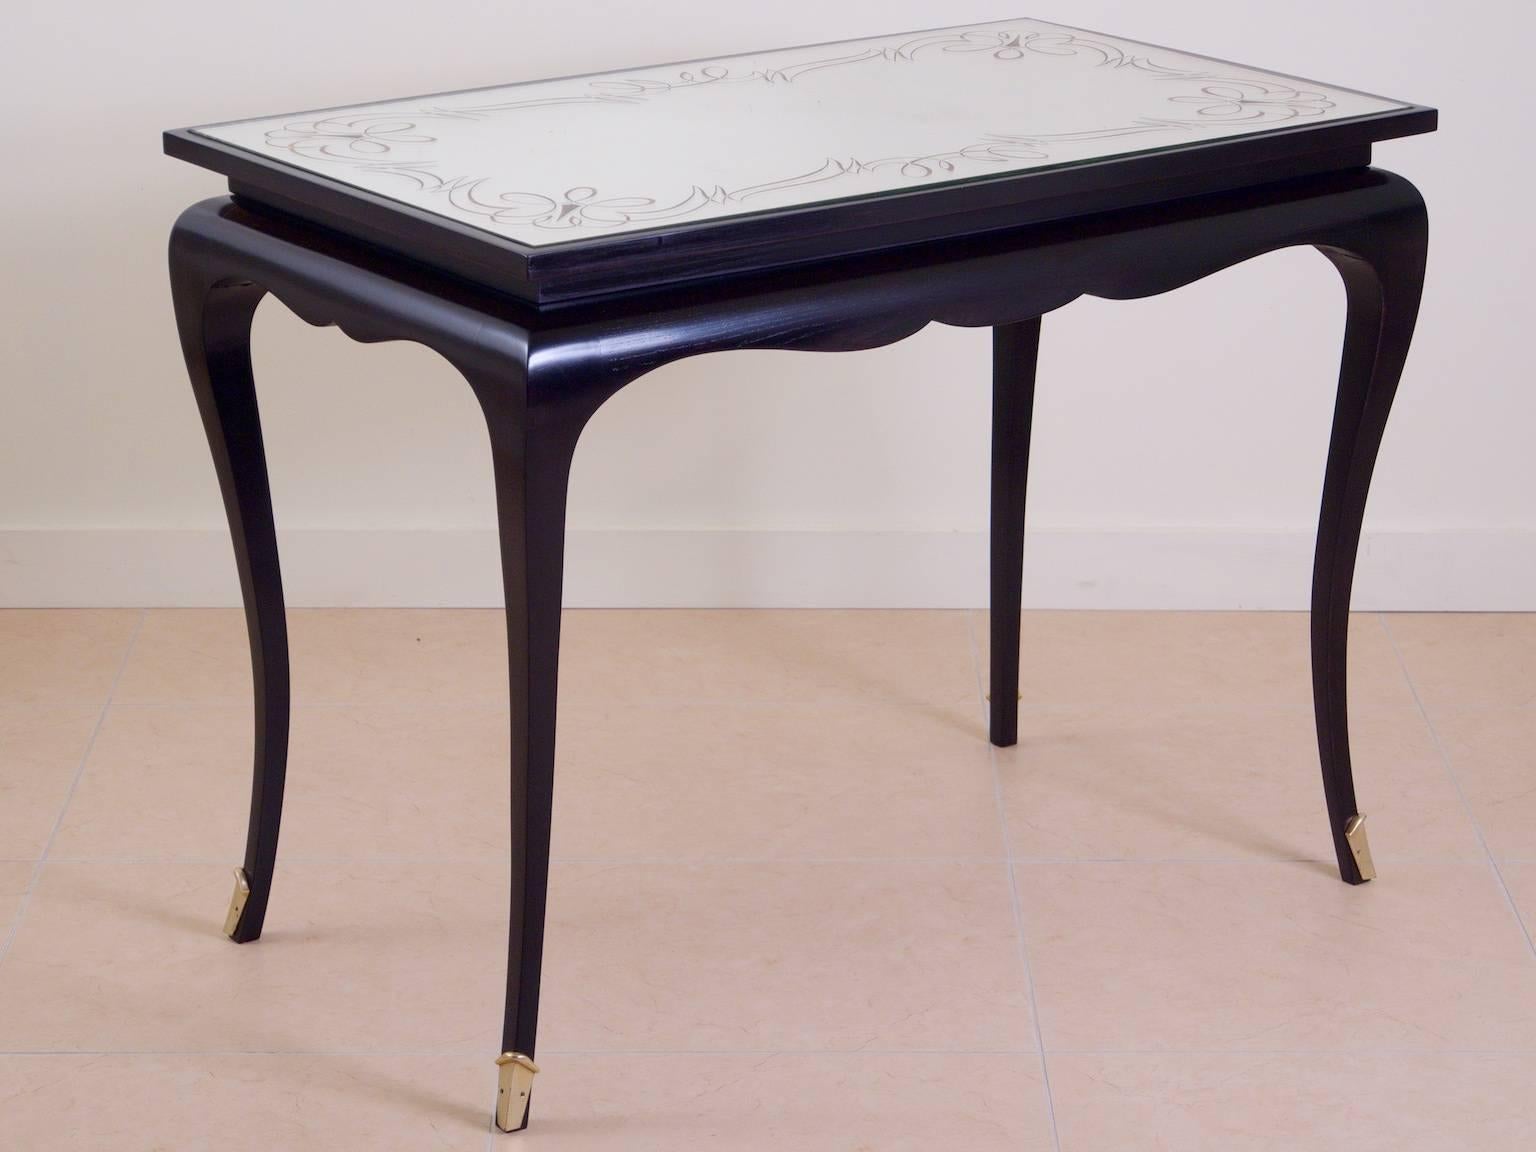 French Art Deco salon table, center table or writing table by André Arbus, circa 1937. Ebonized sycamore with nickled bronze mounts and verre églomisé top.